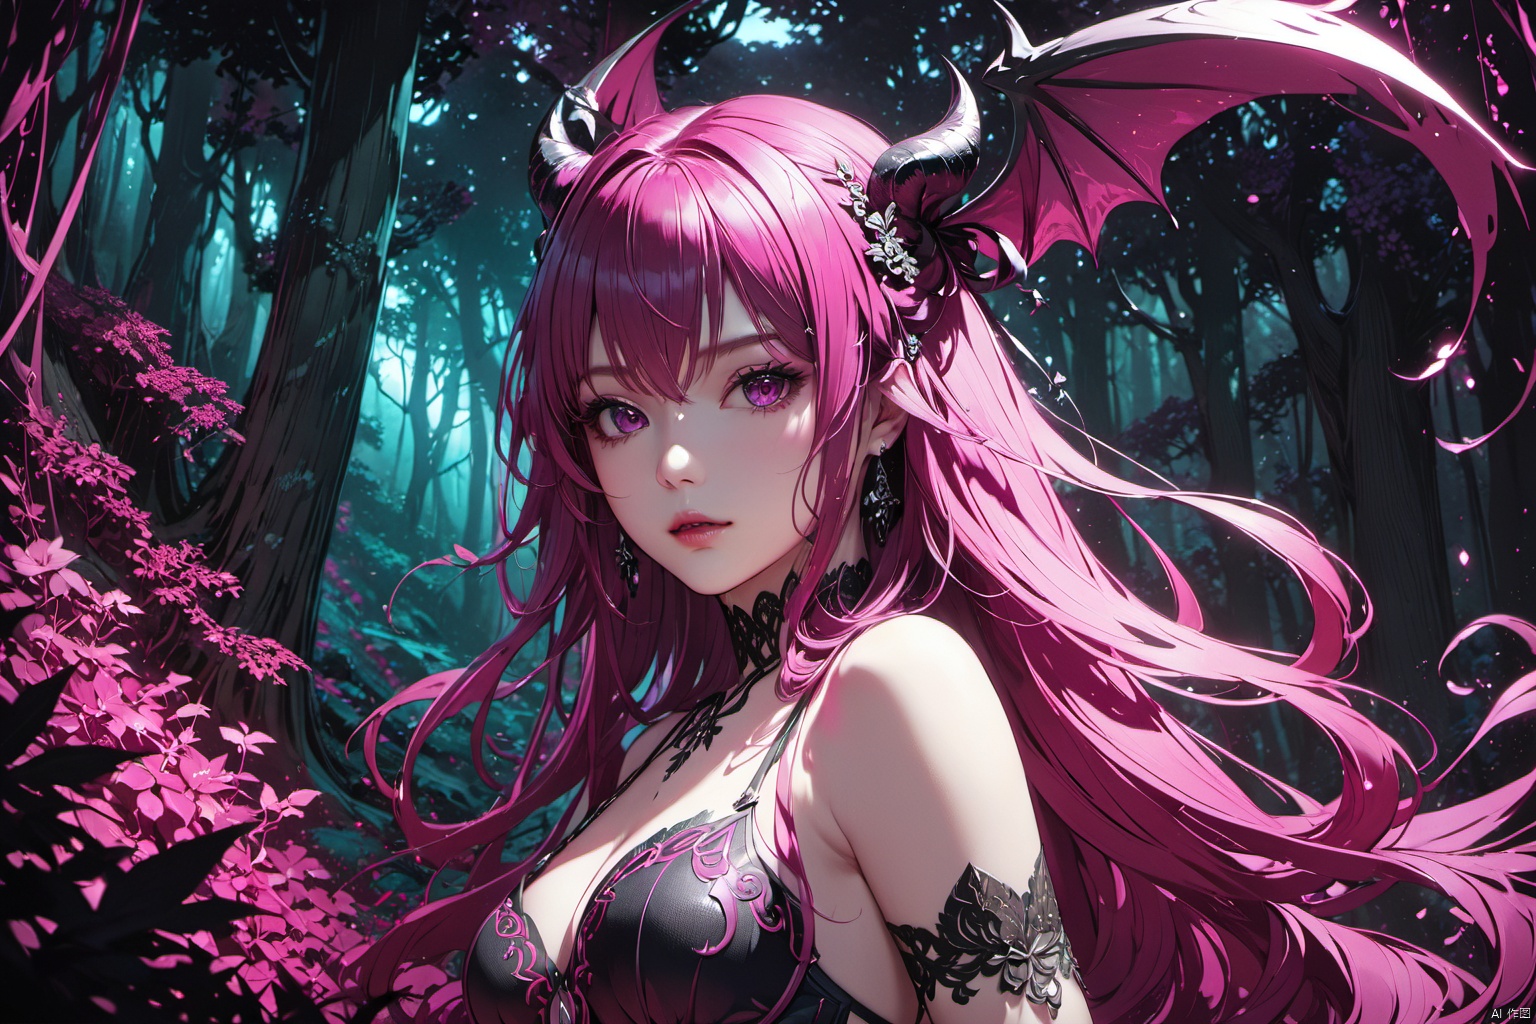  ultra-detailed,(best quality),((masterpiece)),(highres),original,extremely detailed 8K wallpaper,(an extremely delicate and beautiful),anime,detail face and eyes, perfect hands,  (close up , solo),   Magenta theme, 

An anime illustration of a succubus with flowing long hair, set in a forest with cinematic lighting effects that create striking contrasts between light and shadow.